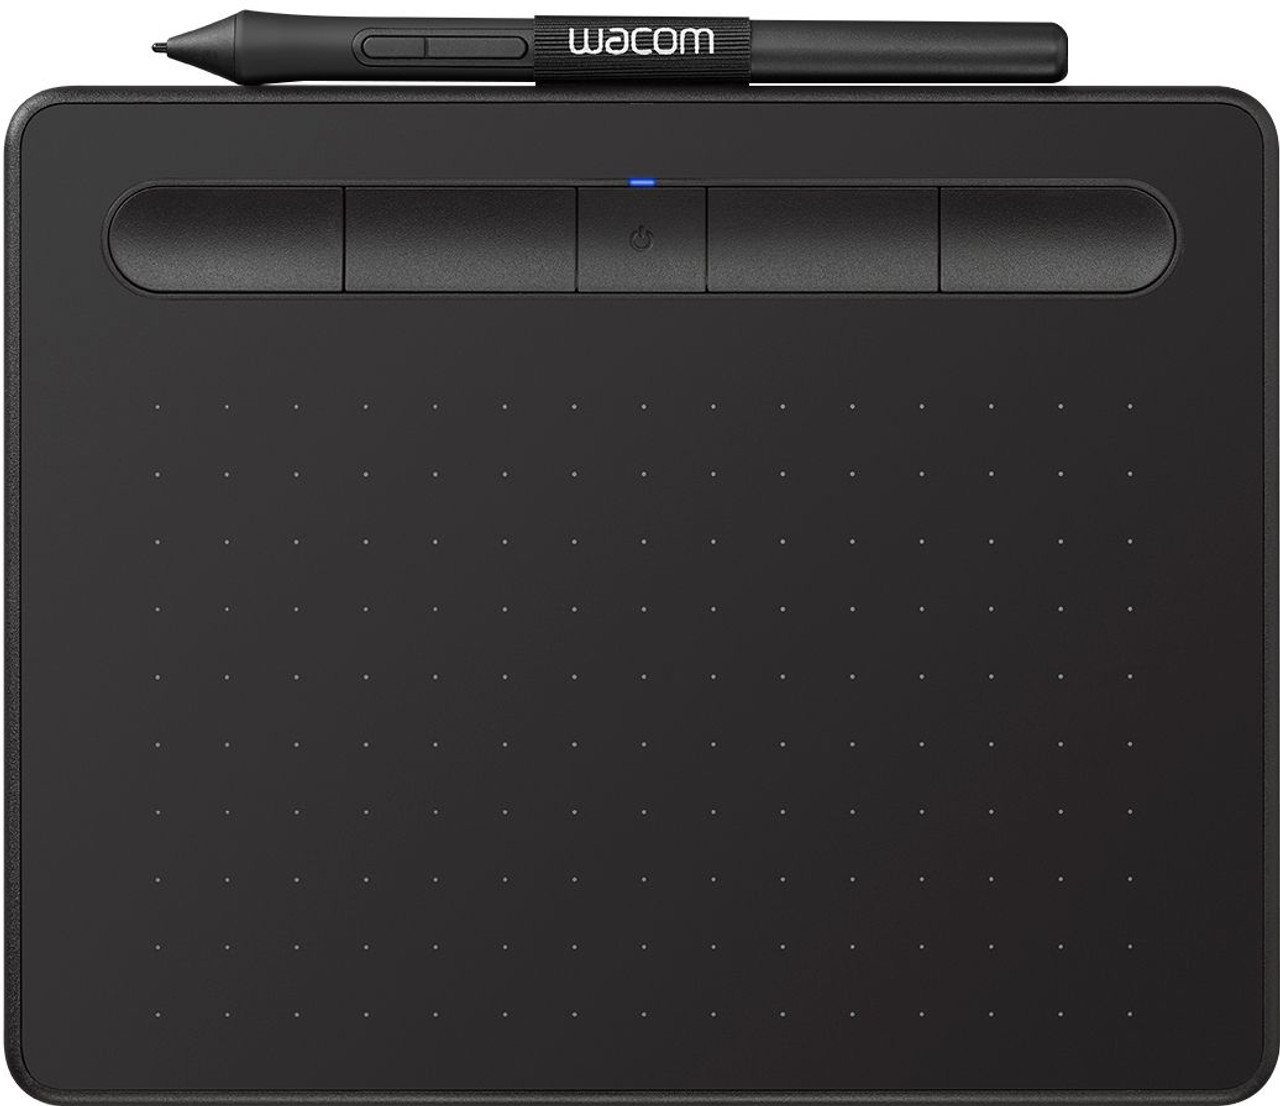 Wacom - Intuos Wireless Graphic Tablet (Small) with 3 Bonus Software included - Black